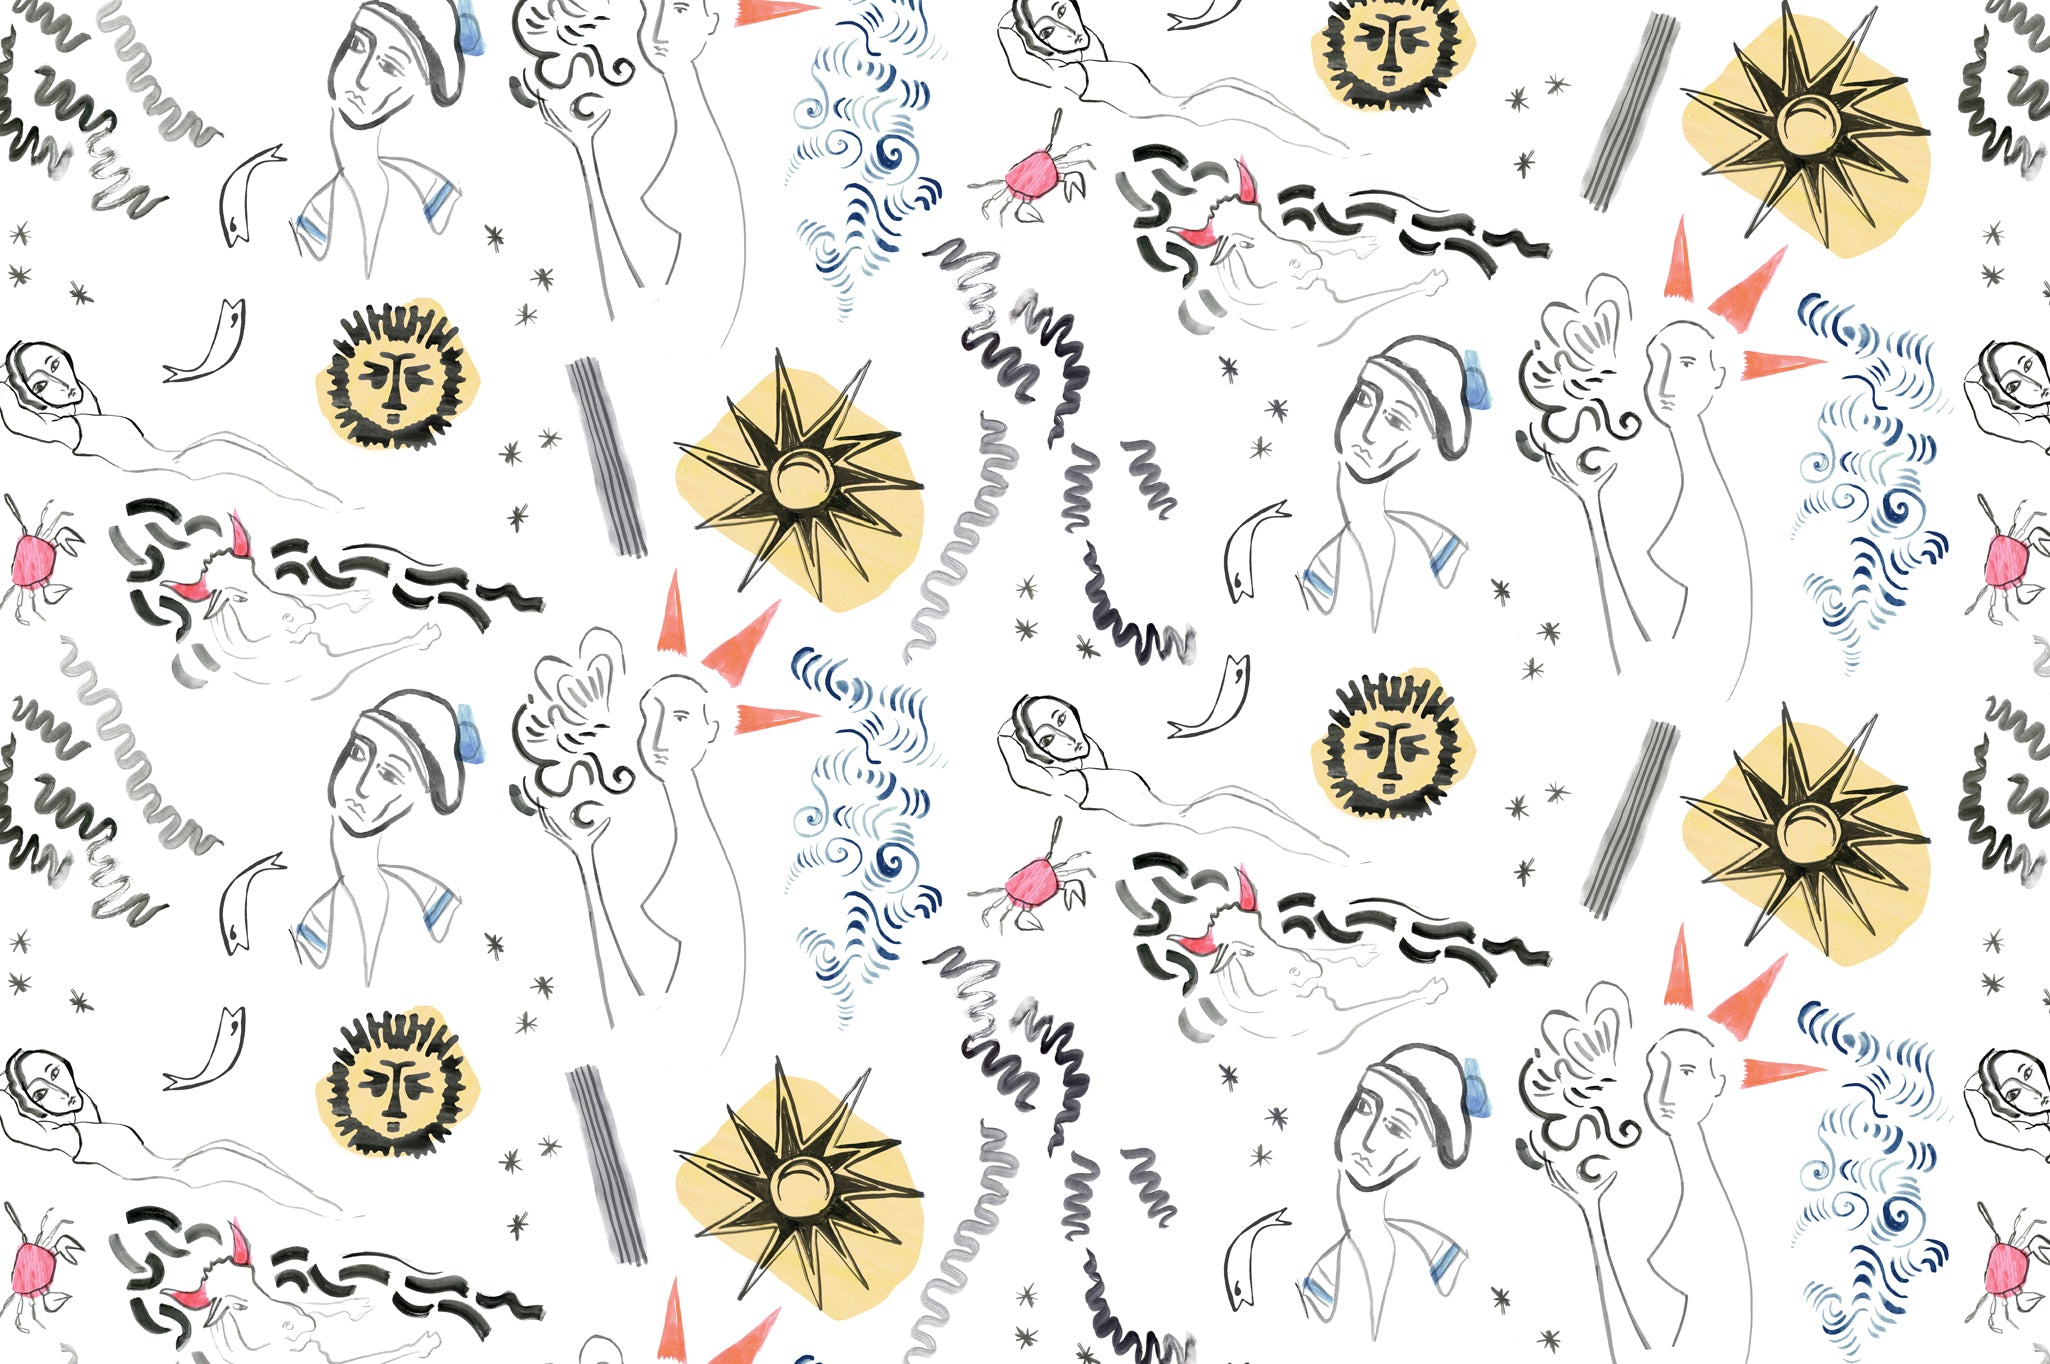 Detail of fabric in a playful sketched print of faces, suns and bulls in black, yellow and blue on a white field.